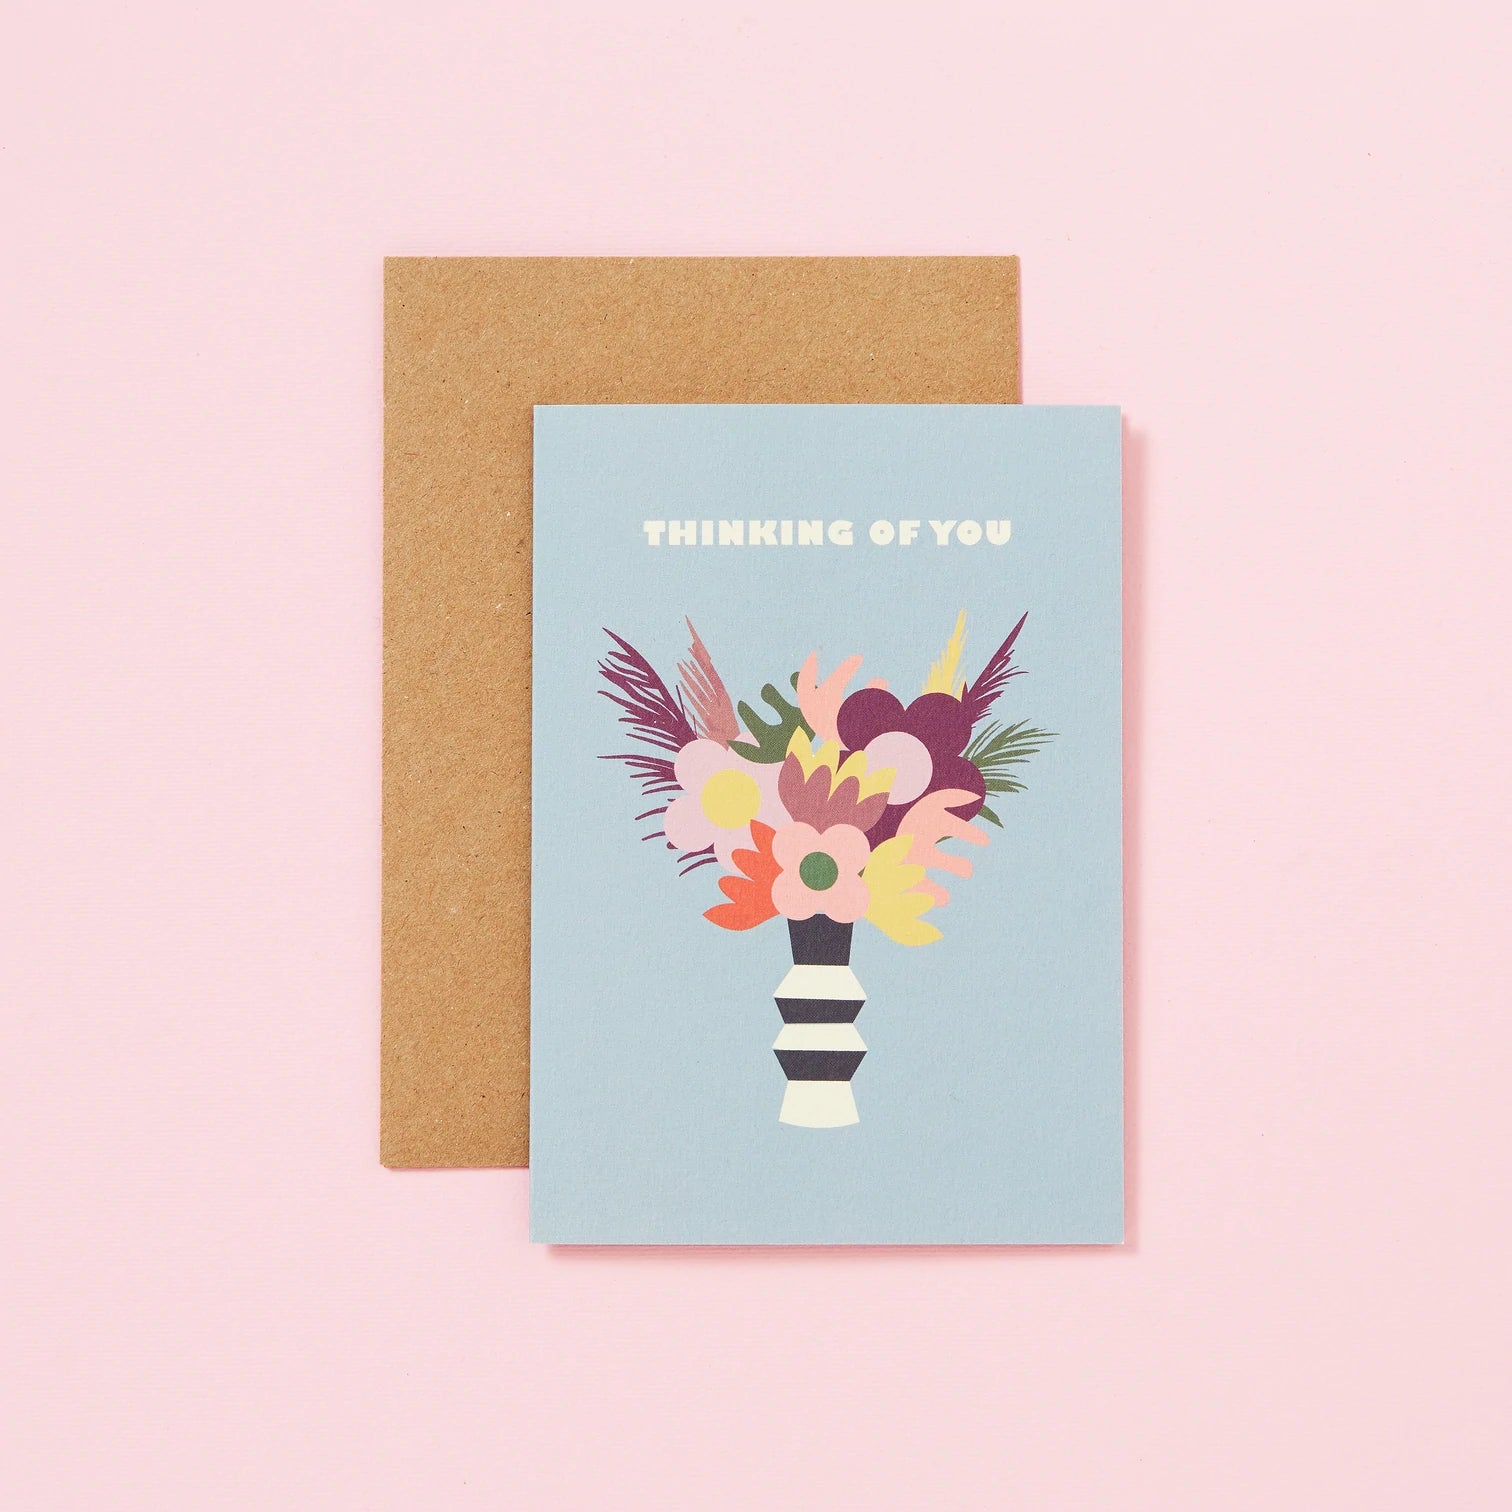 THINKING OF YOU | CARD BY TYPE AND STORY